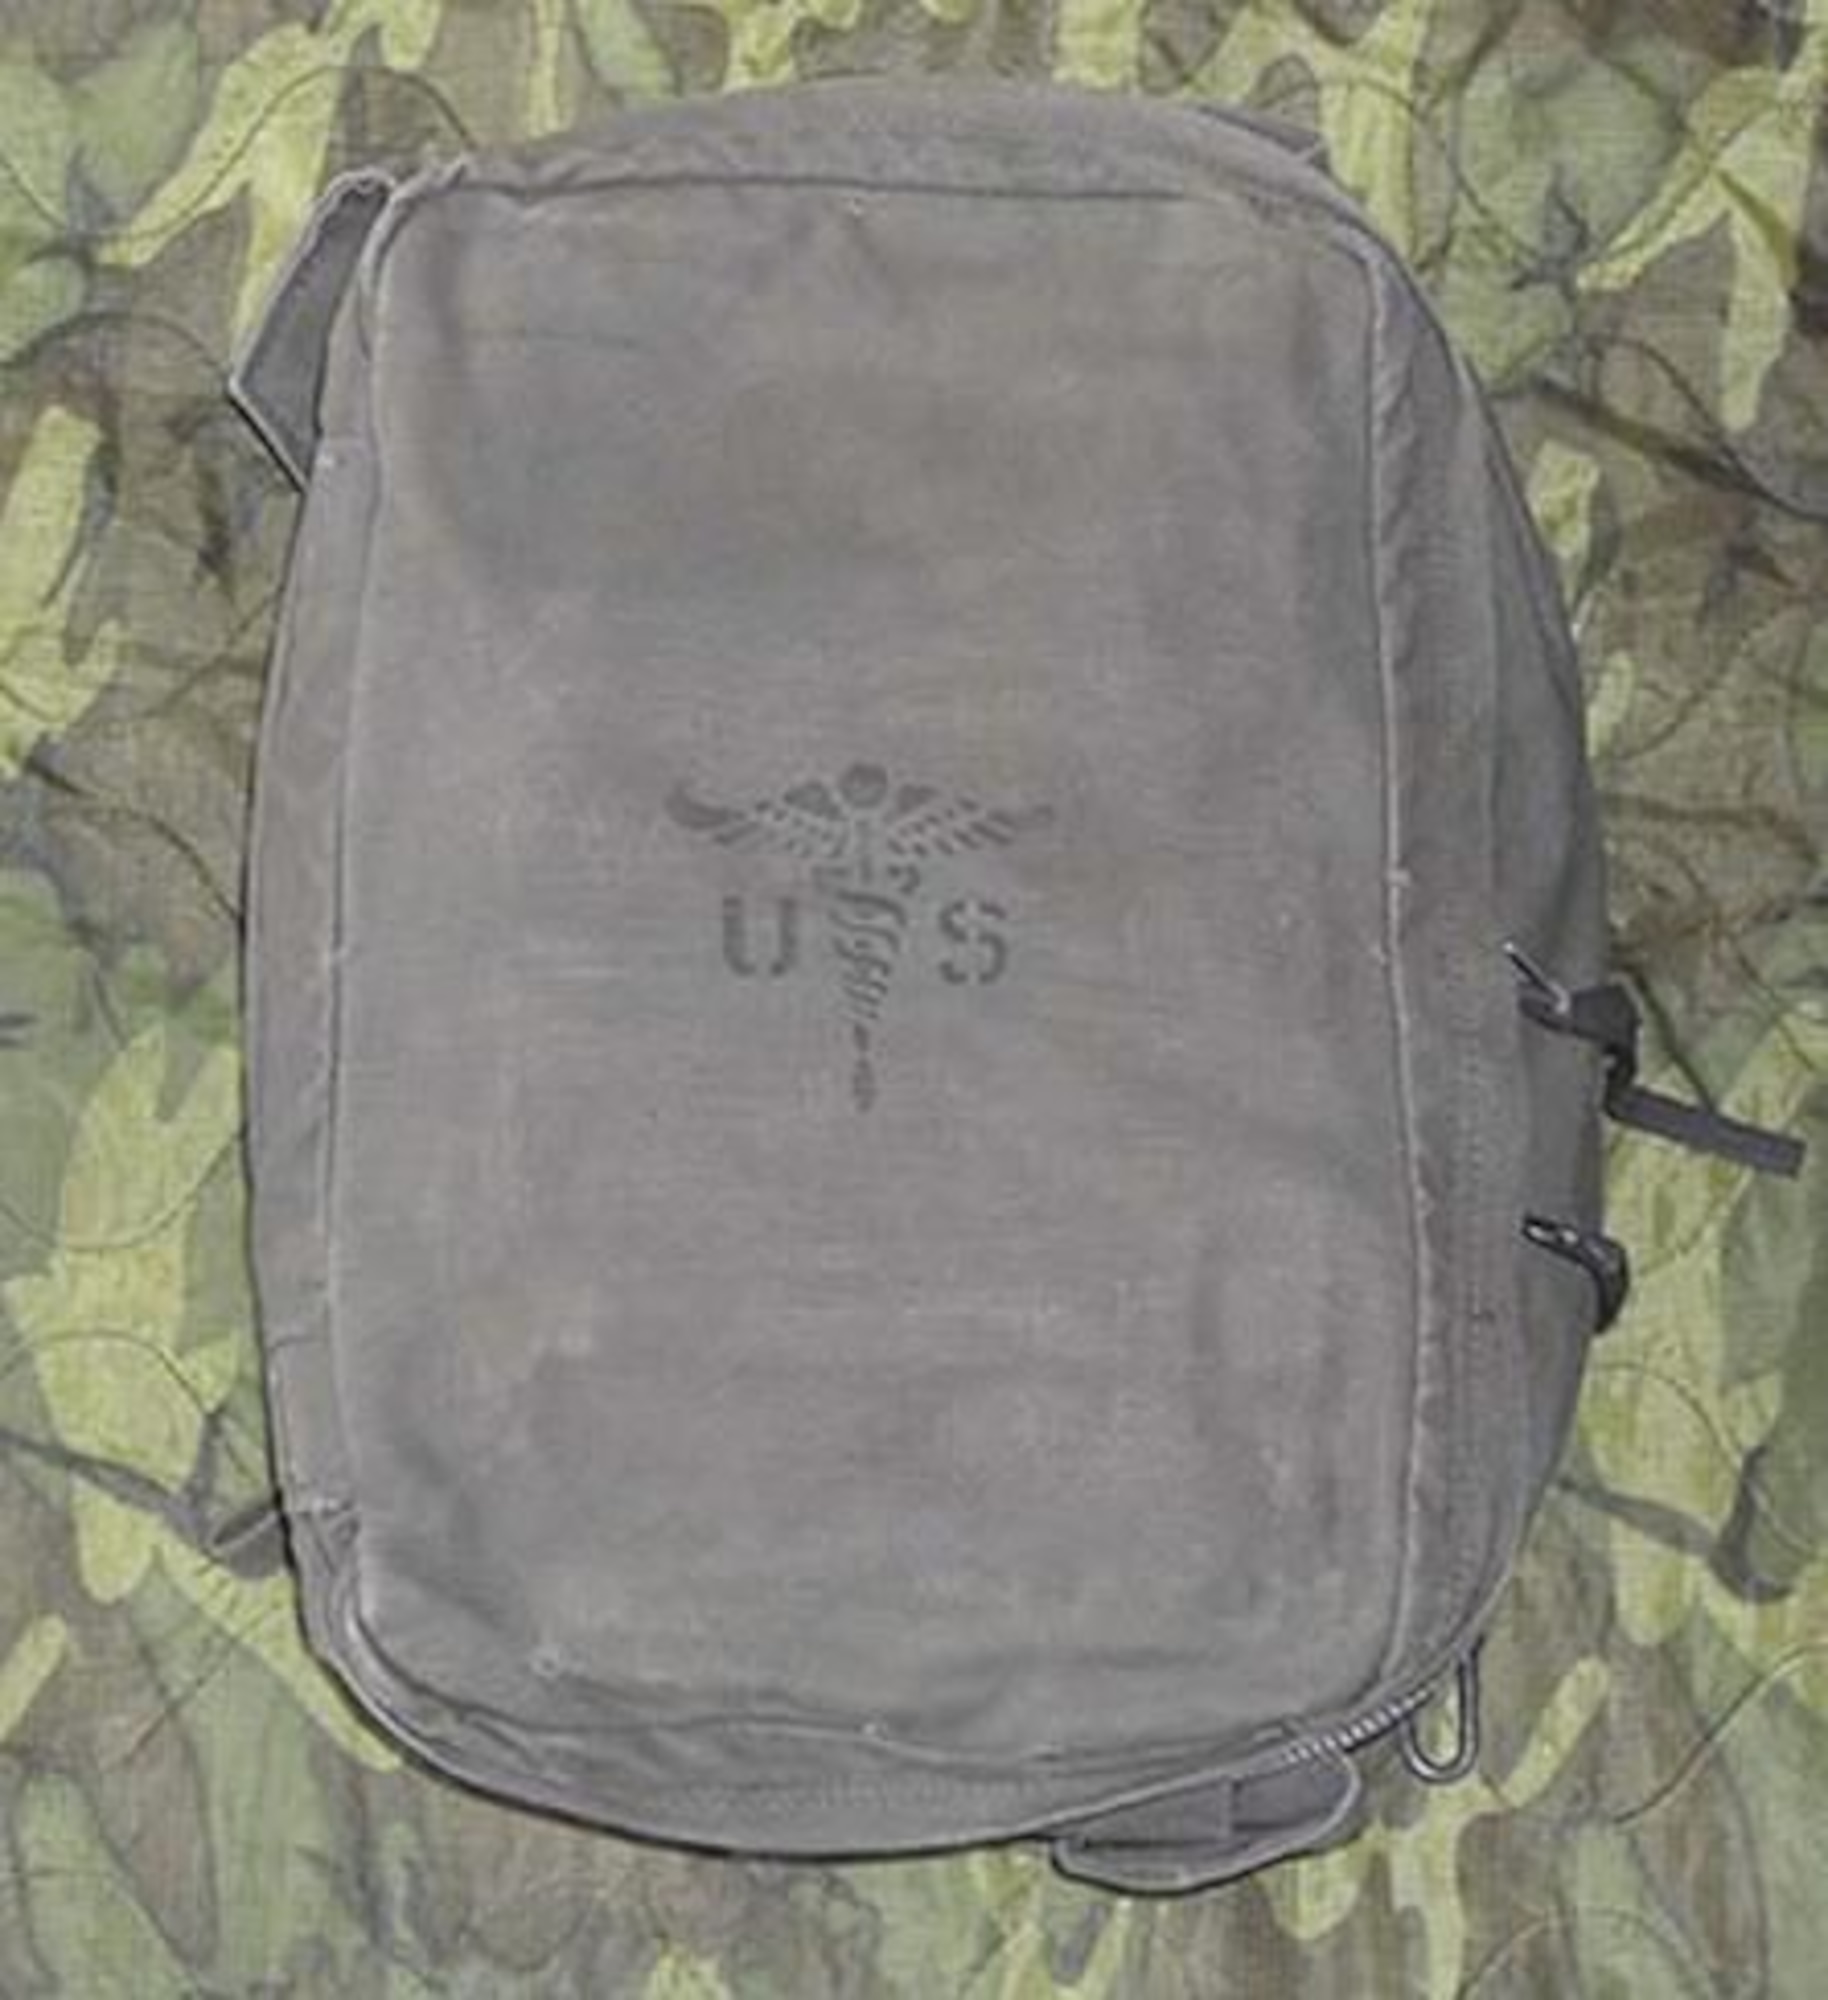 This rectangular canvas rucksack contains large internal space for storing various assorted medical equipment. It has several inner pockets and ties to keep an M5 aid bag secure. The M5 bag contained all the medical supplies a platoon would need. (Photo courtesy of Army Medical Department Center of History and Heritage, U.S. Army Medical Command)